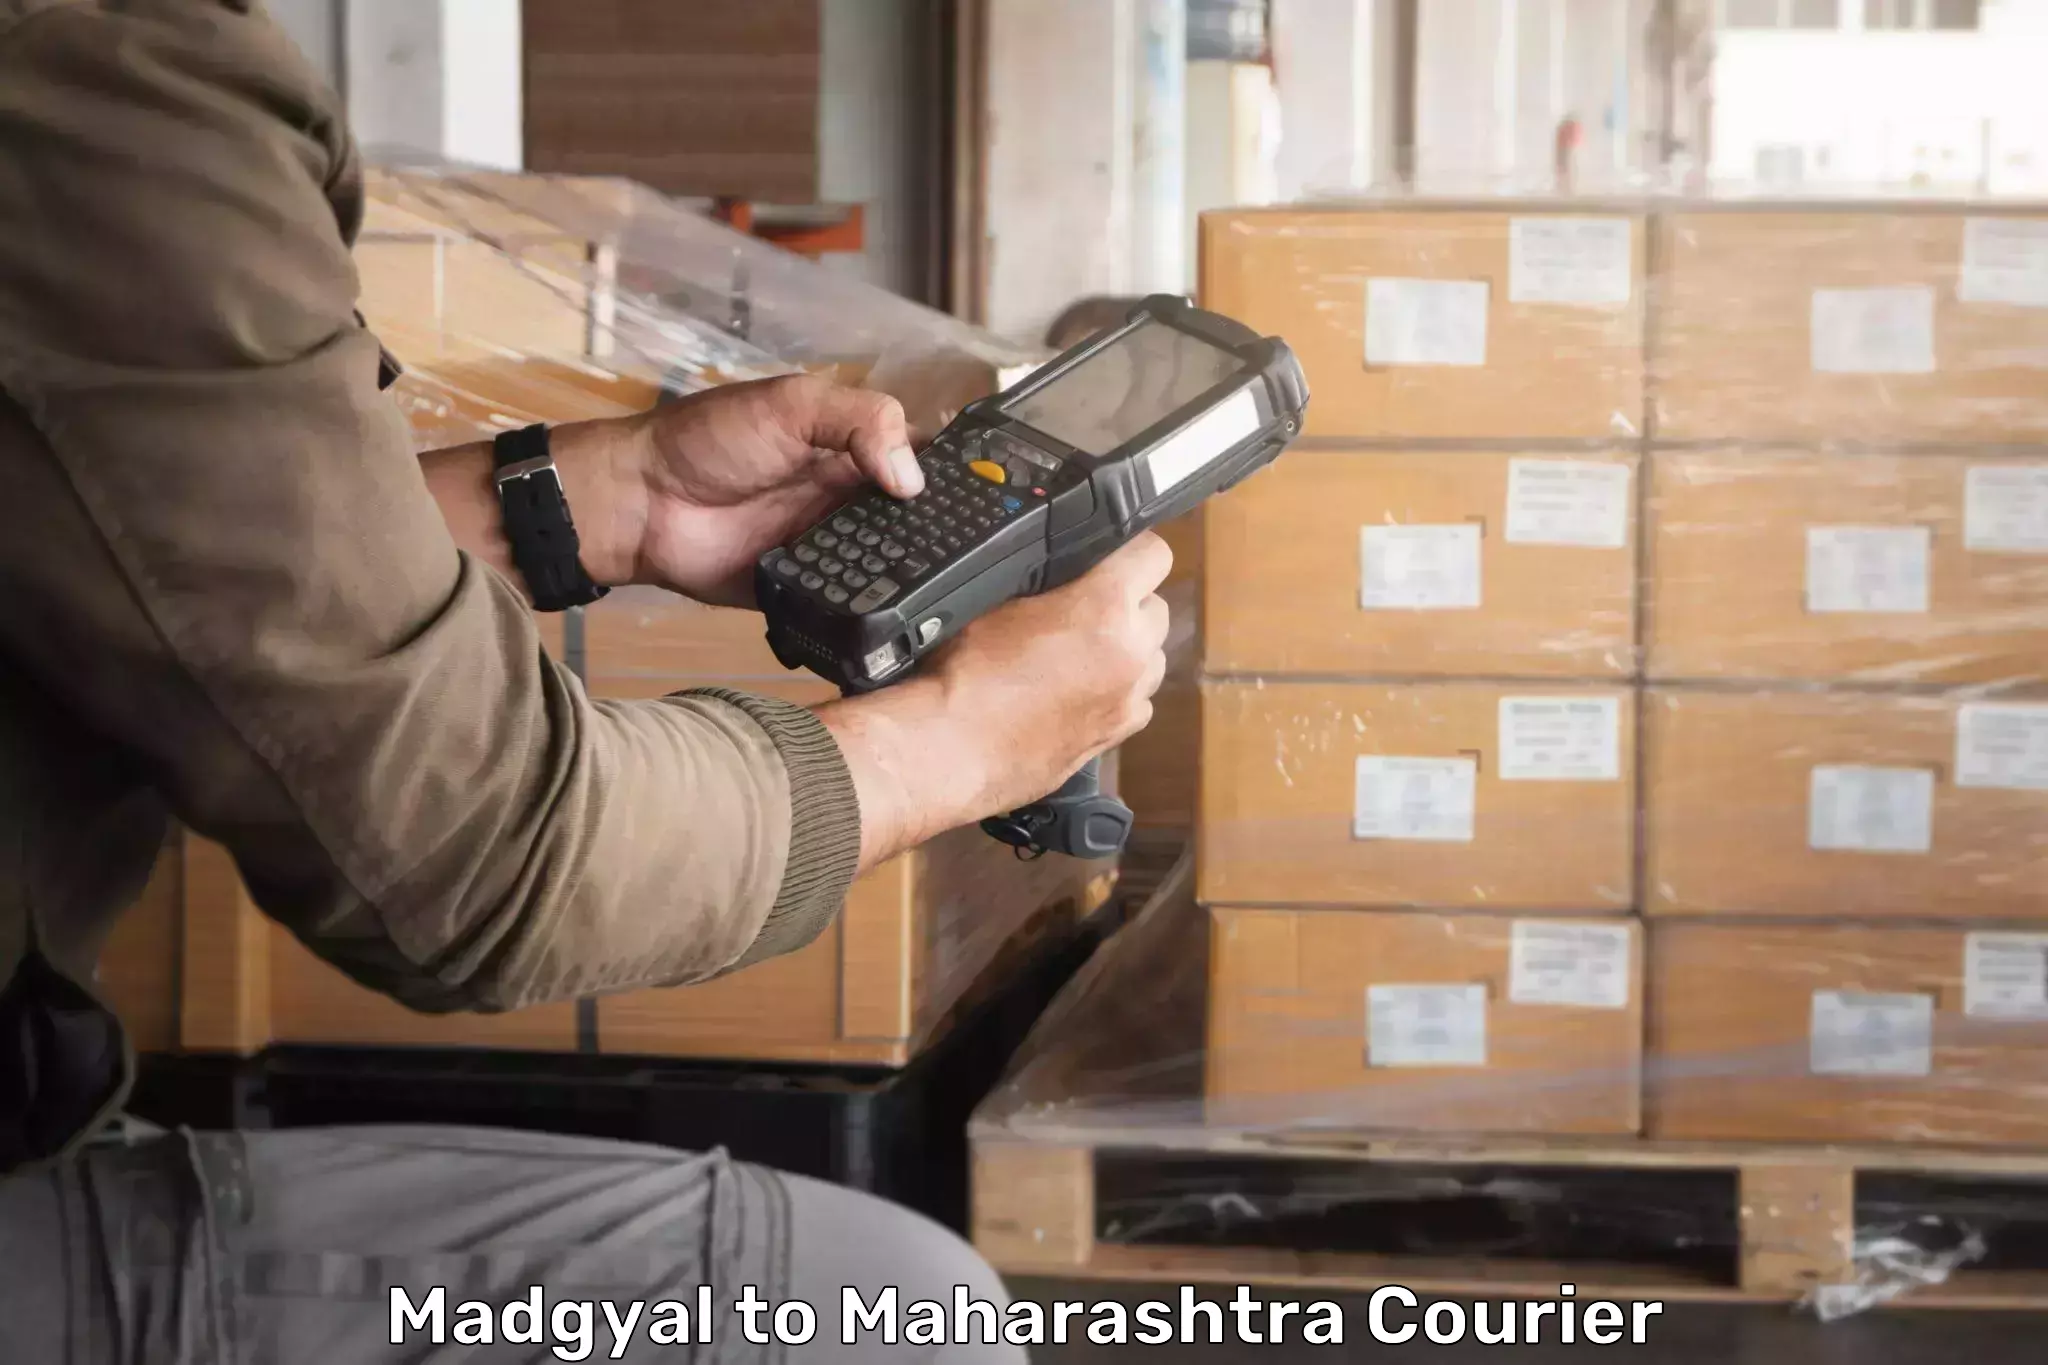 24-hour delivery options Madgyal to Chandrapur